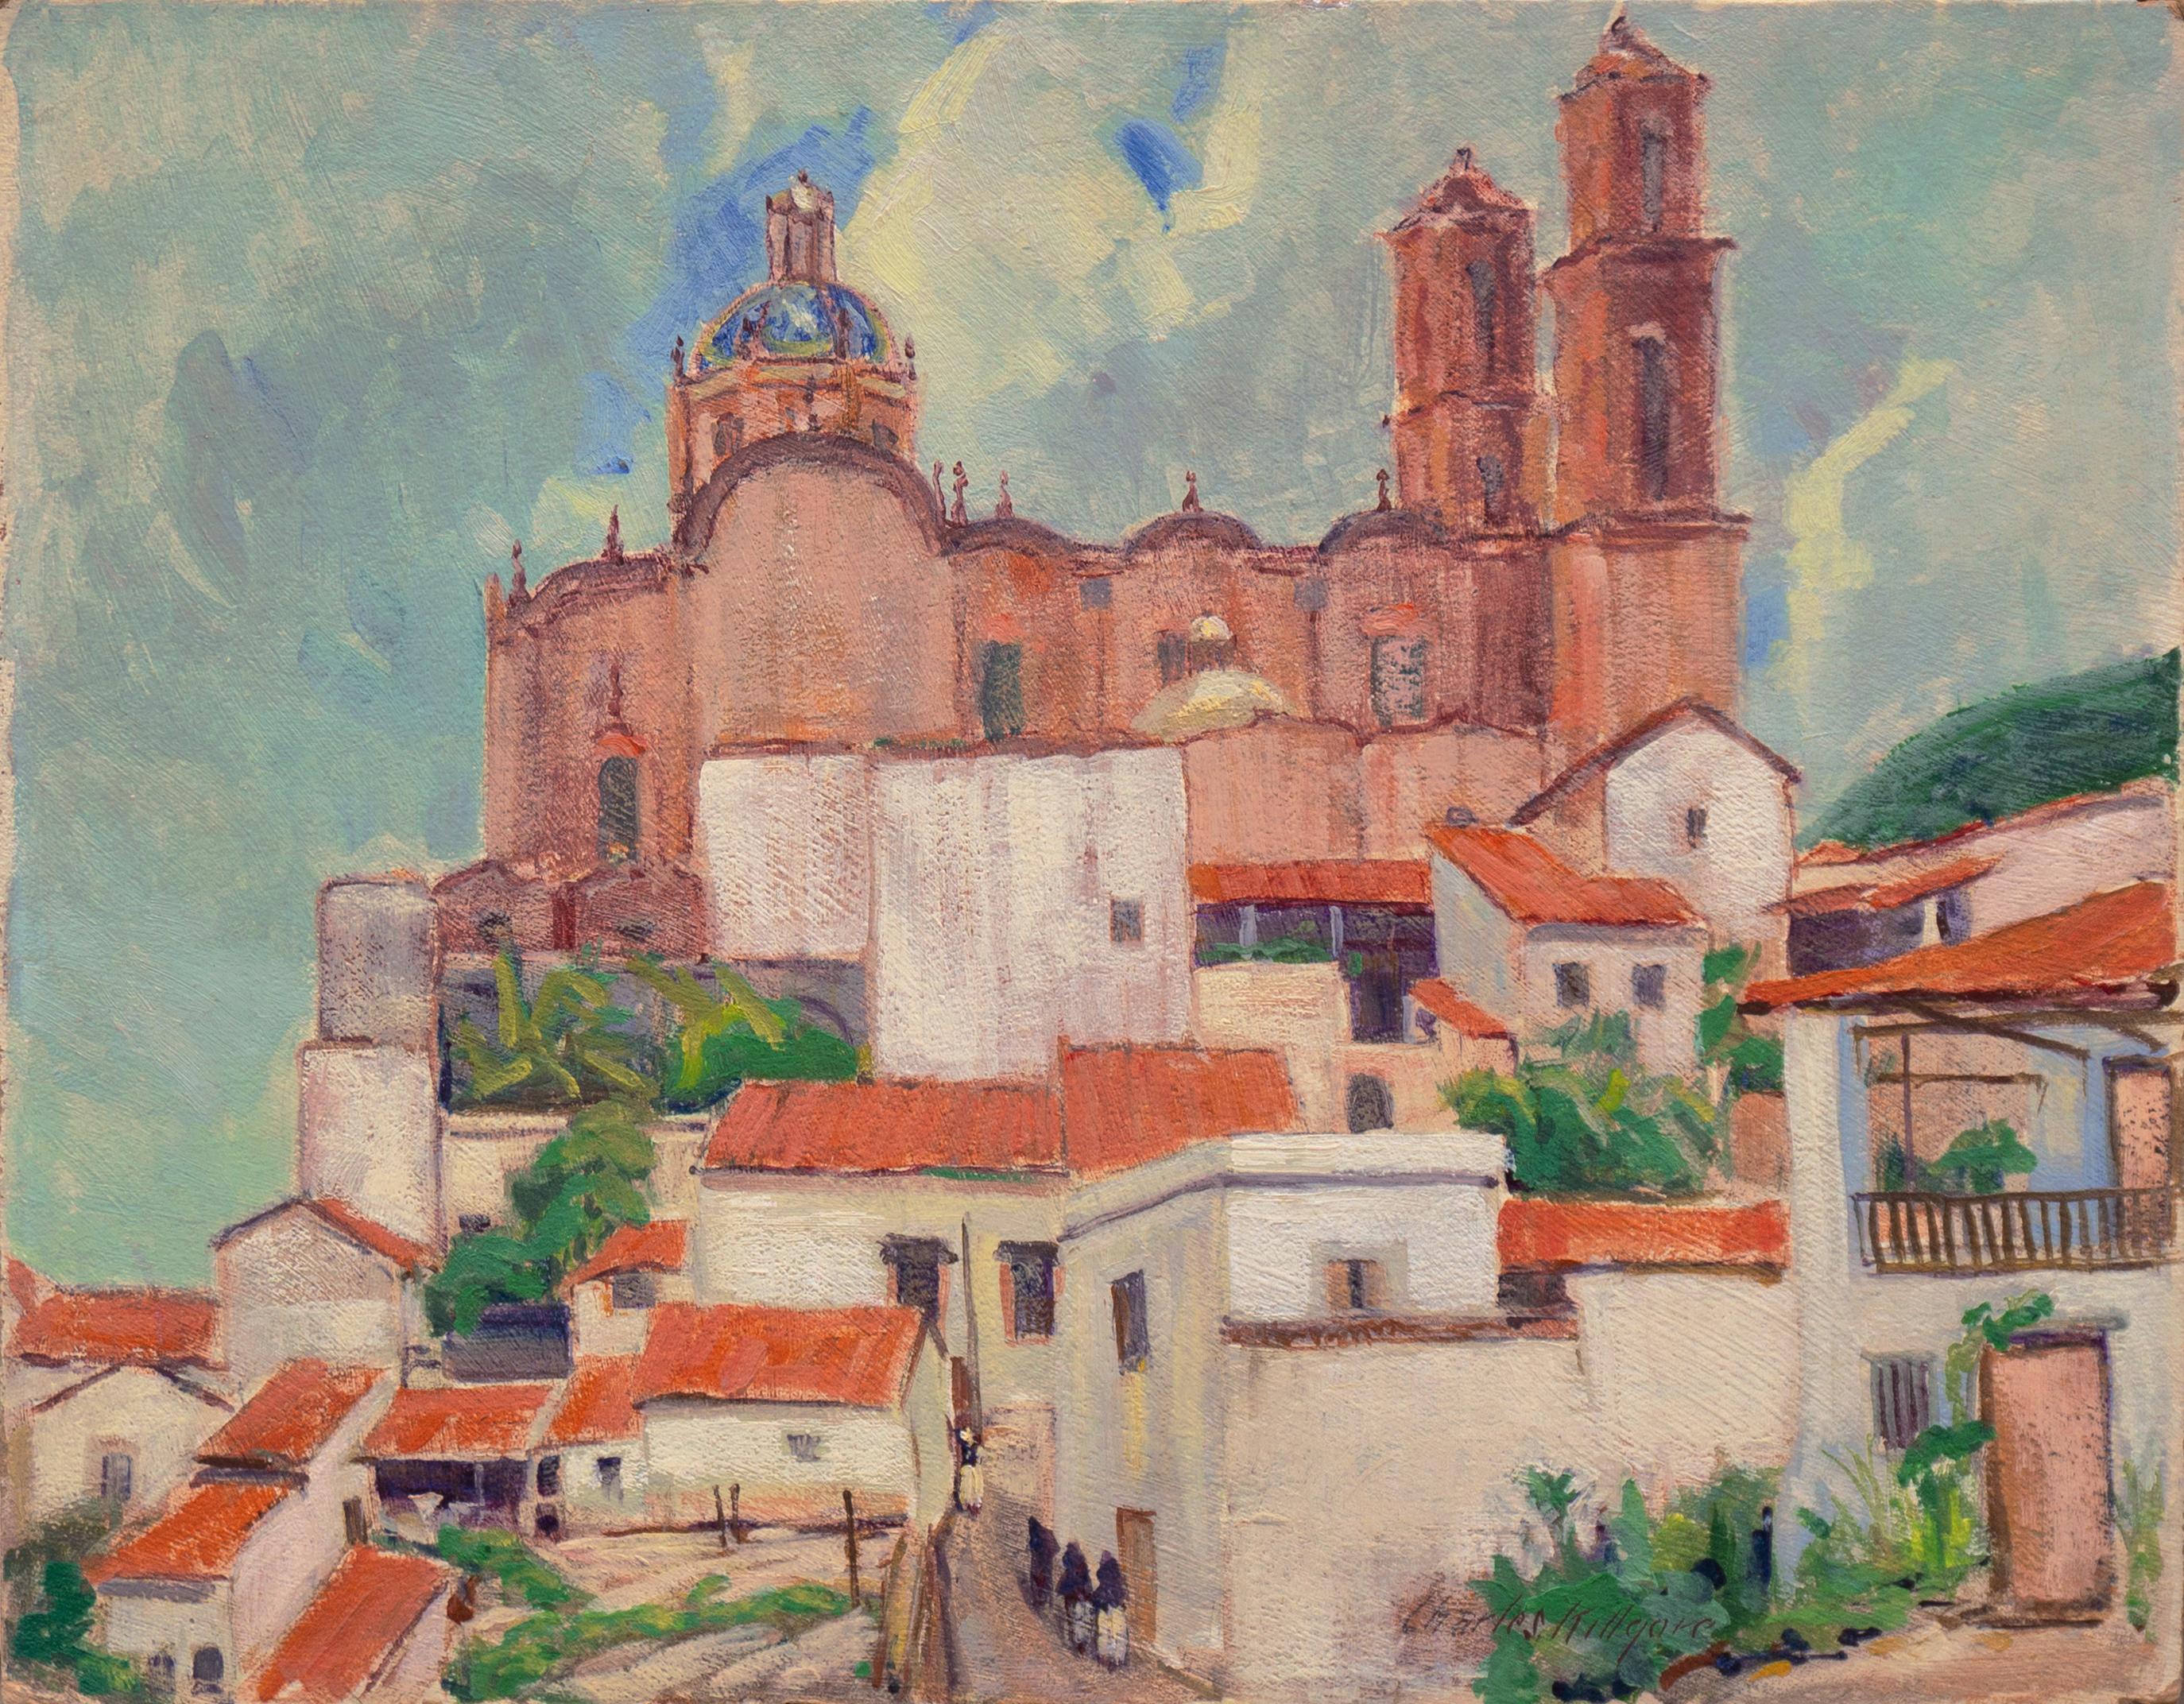 Landscape Painting Charles Killgore - Taxco, Mexique, Paris, Louvre, Who Was Who in American Art, PAFA, AIC